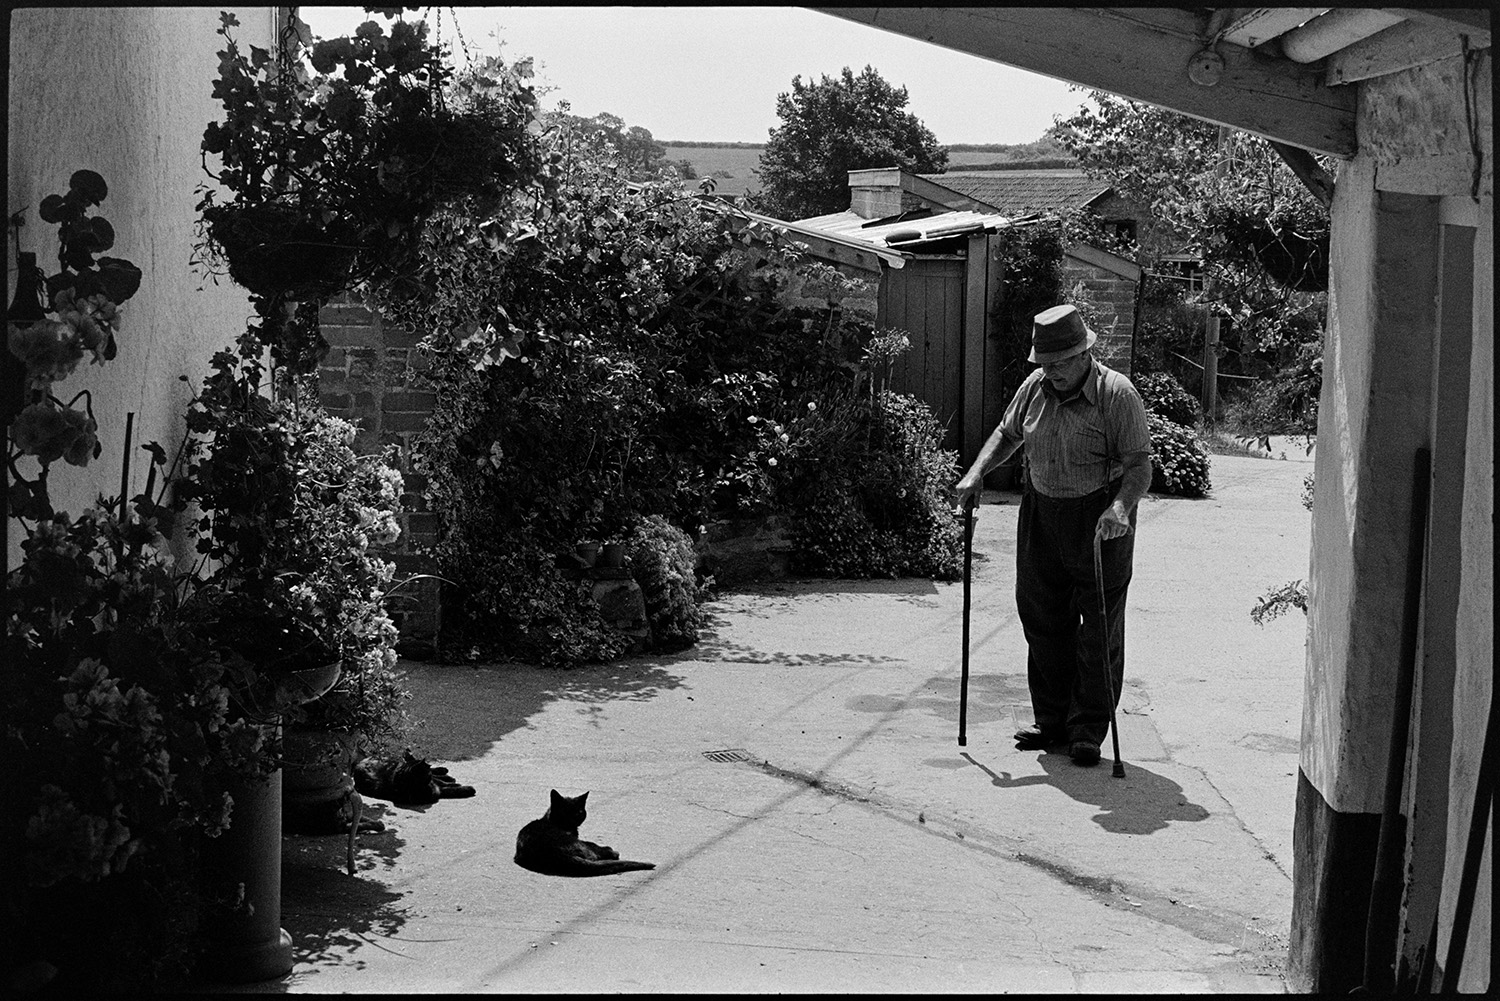 Man with sticks in courtyard with cat. 
[Mr Eastmond walking through a courtyard with various plants and sheds at Lower Week, High Bickington, using two walking sticks. He is looking at two cats sat in the courtyard.]